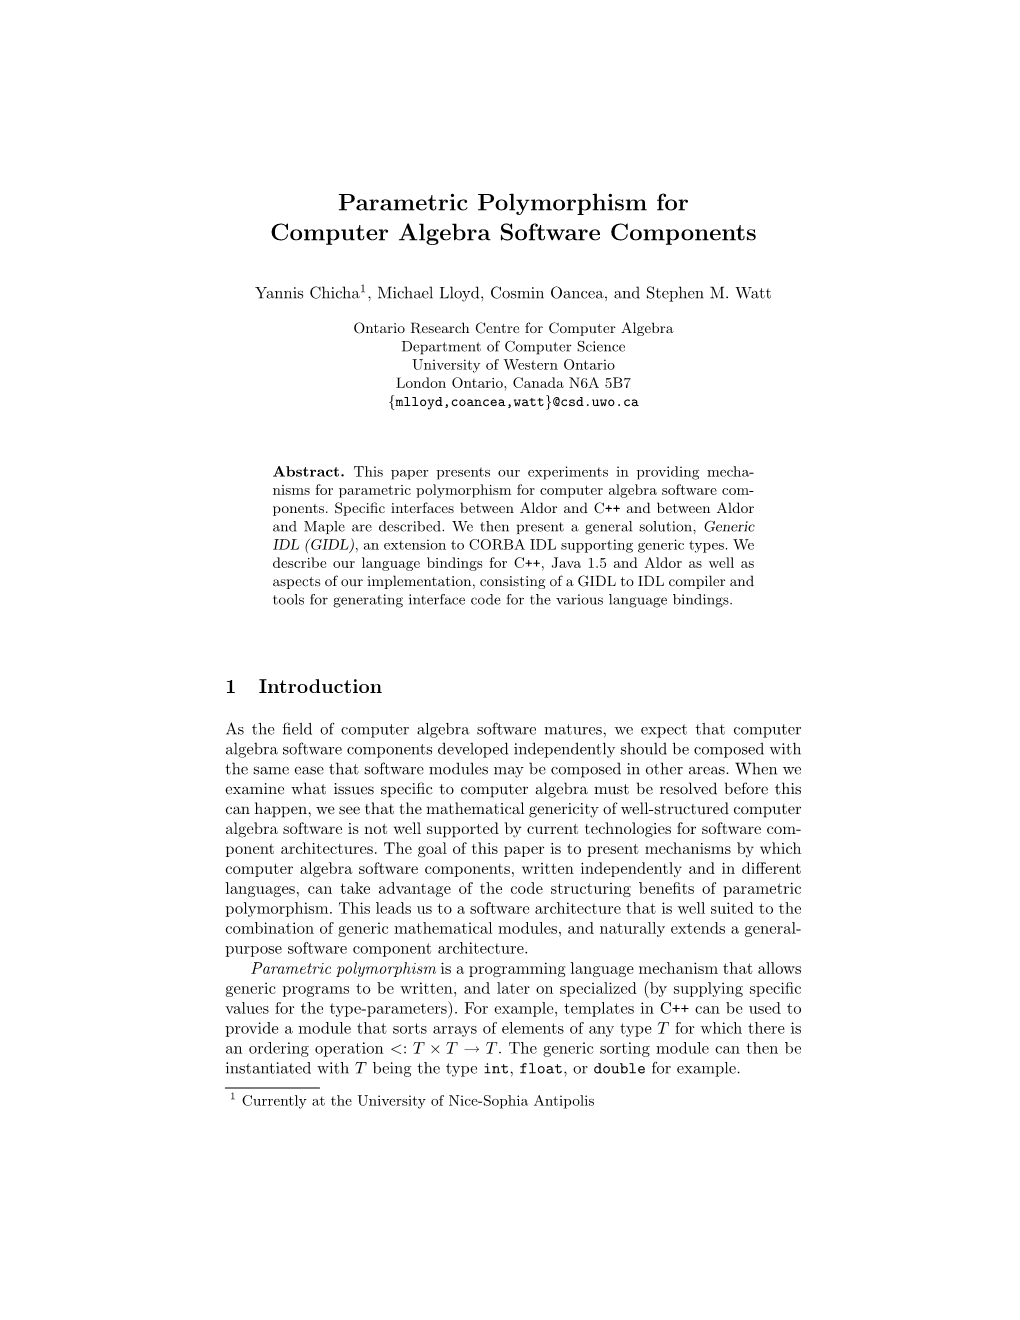 Parametric Polymorphism for Computer Algebra Software Components